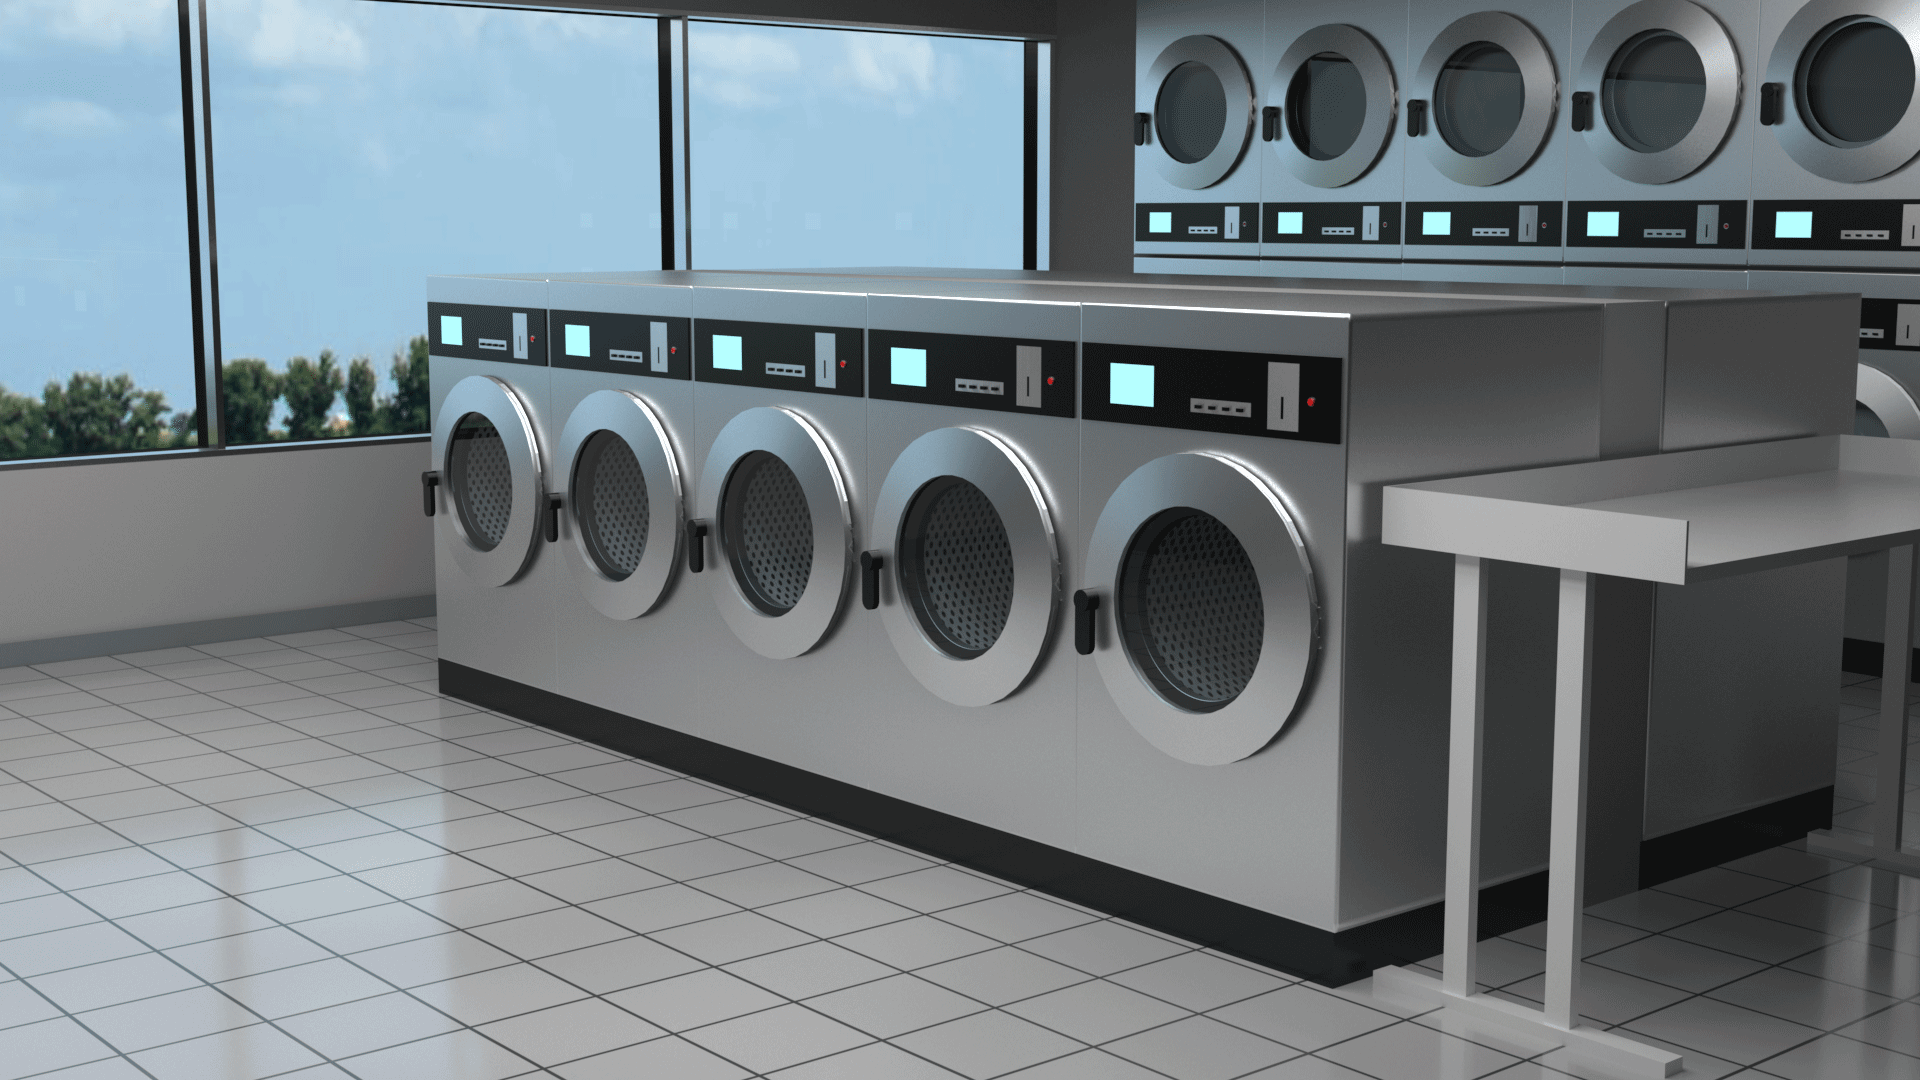 A laundromat showing an area with washers at ground level and additional raised machines in the background.